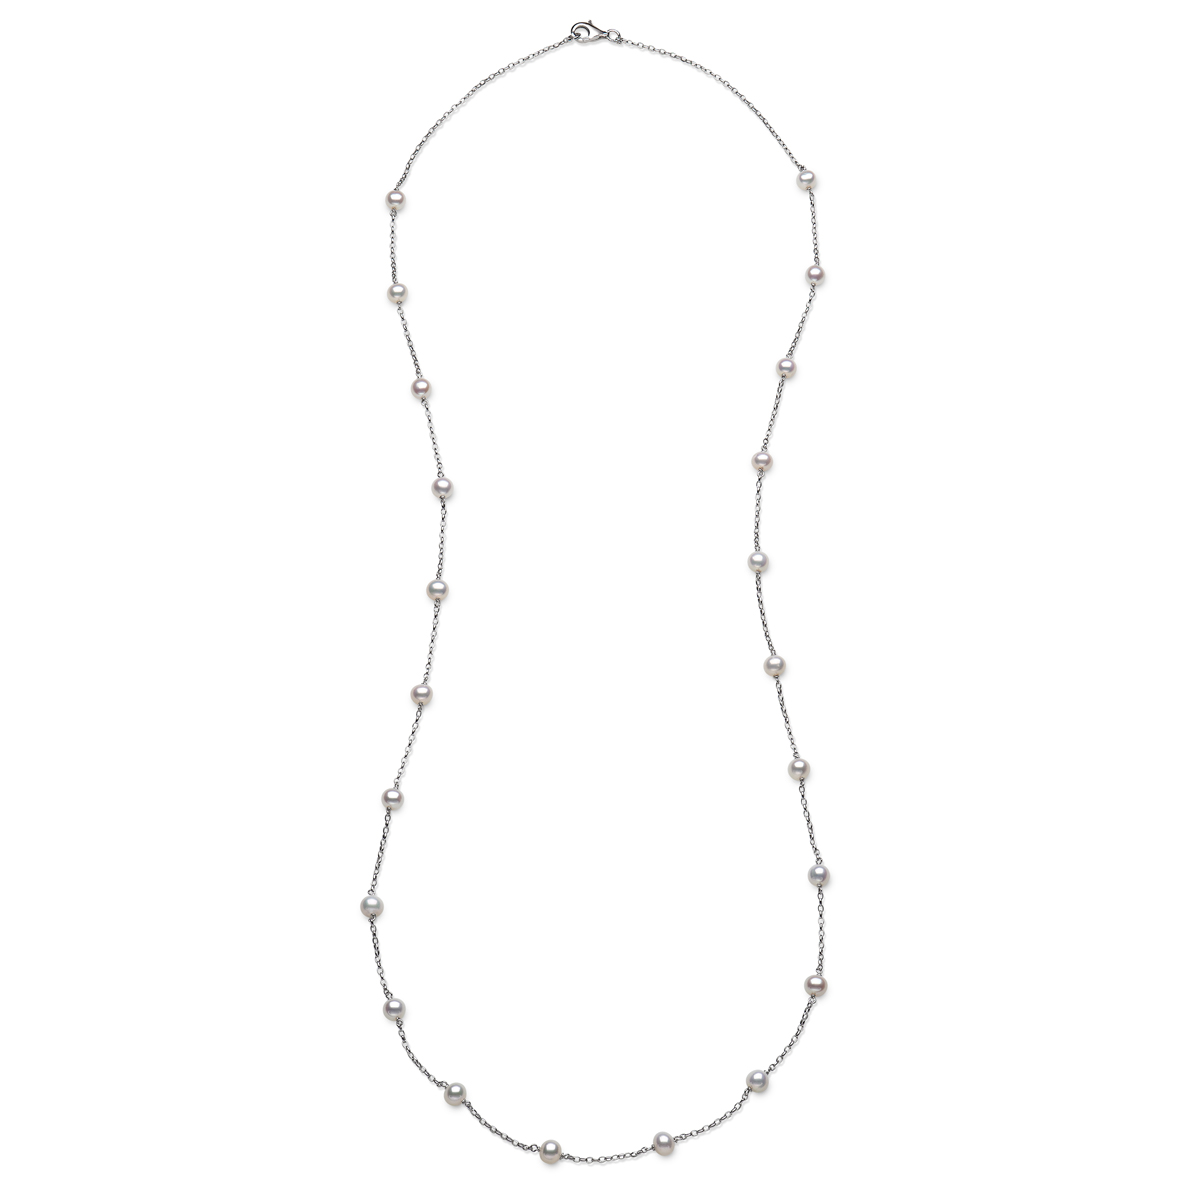 CHINA PEARL SS TINCUP PEARL NECKLACE ON A OVAL LINK CHAIN MEASURING 36